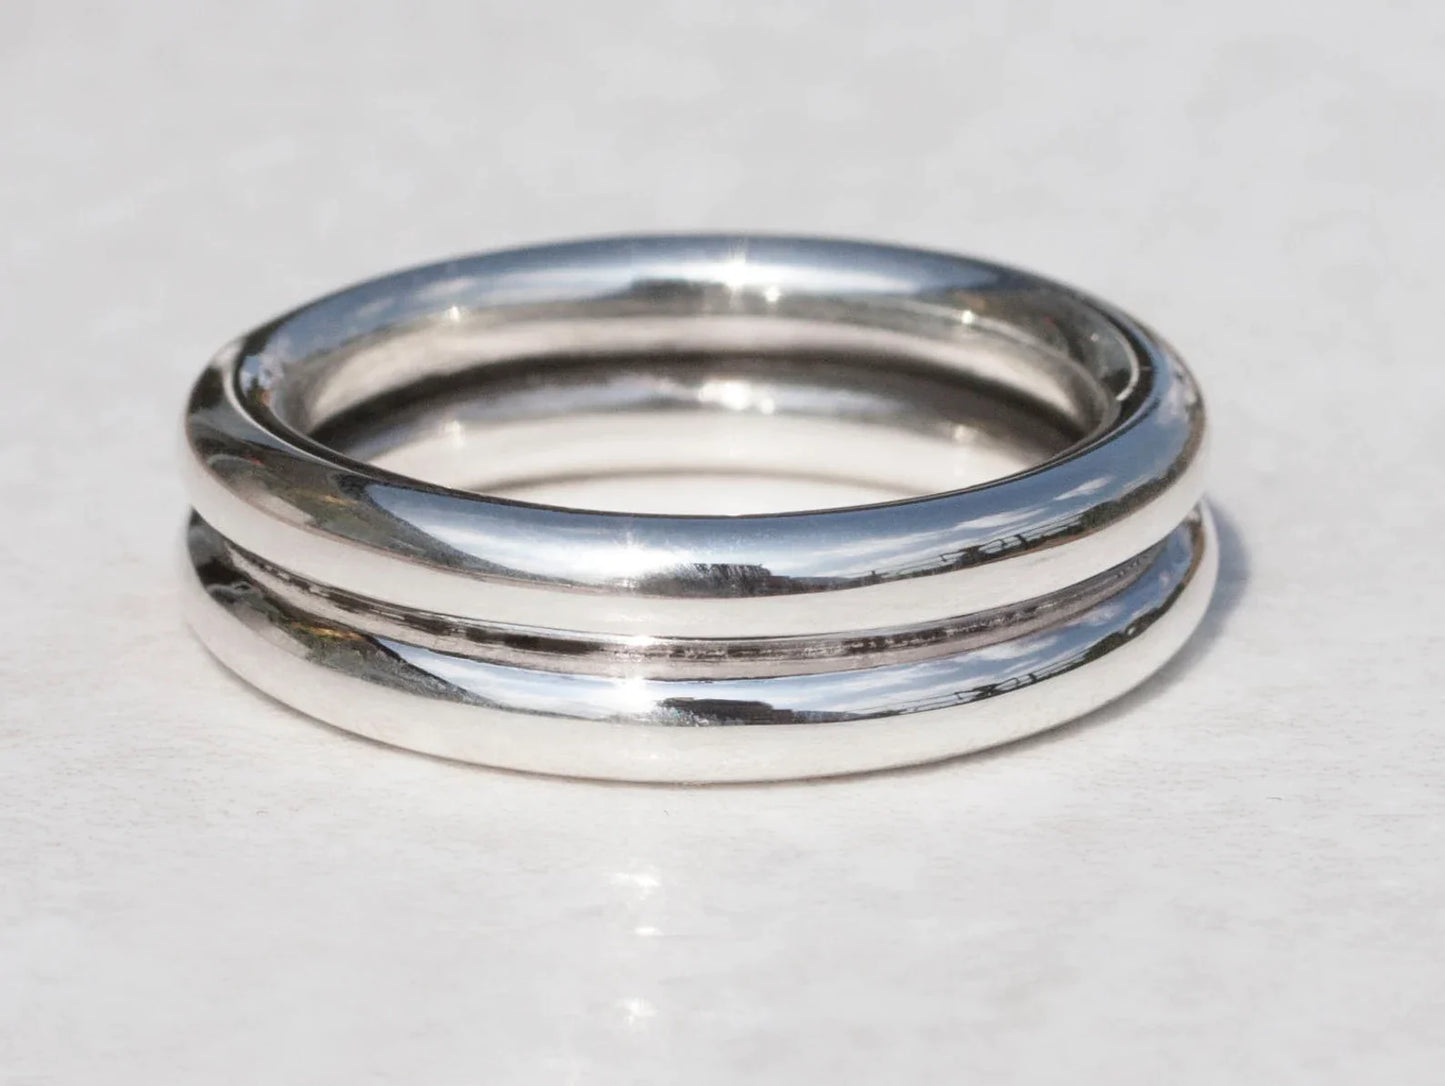 Add On: Double / Thick Sterling Silver Ring or Cuff Band